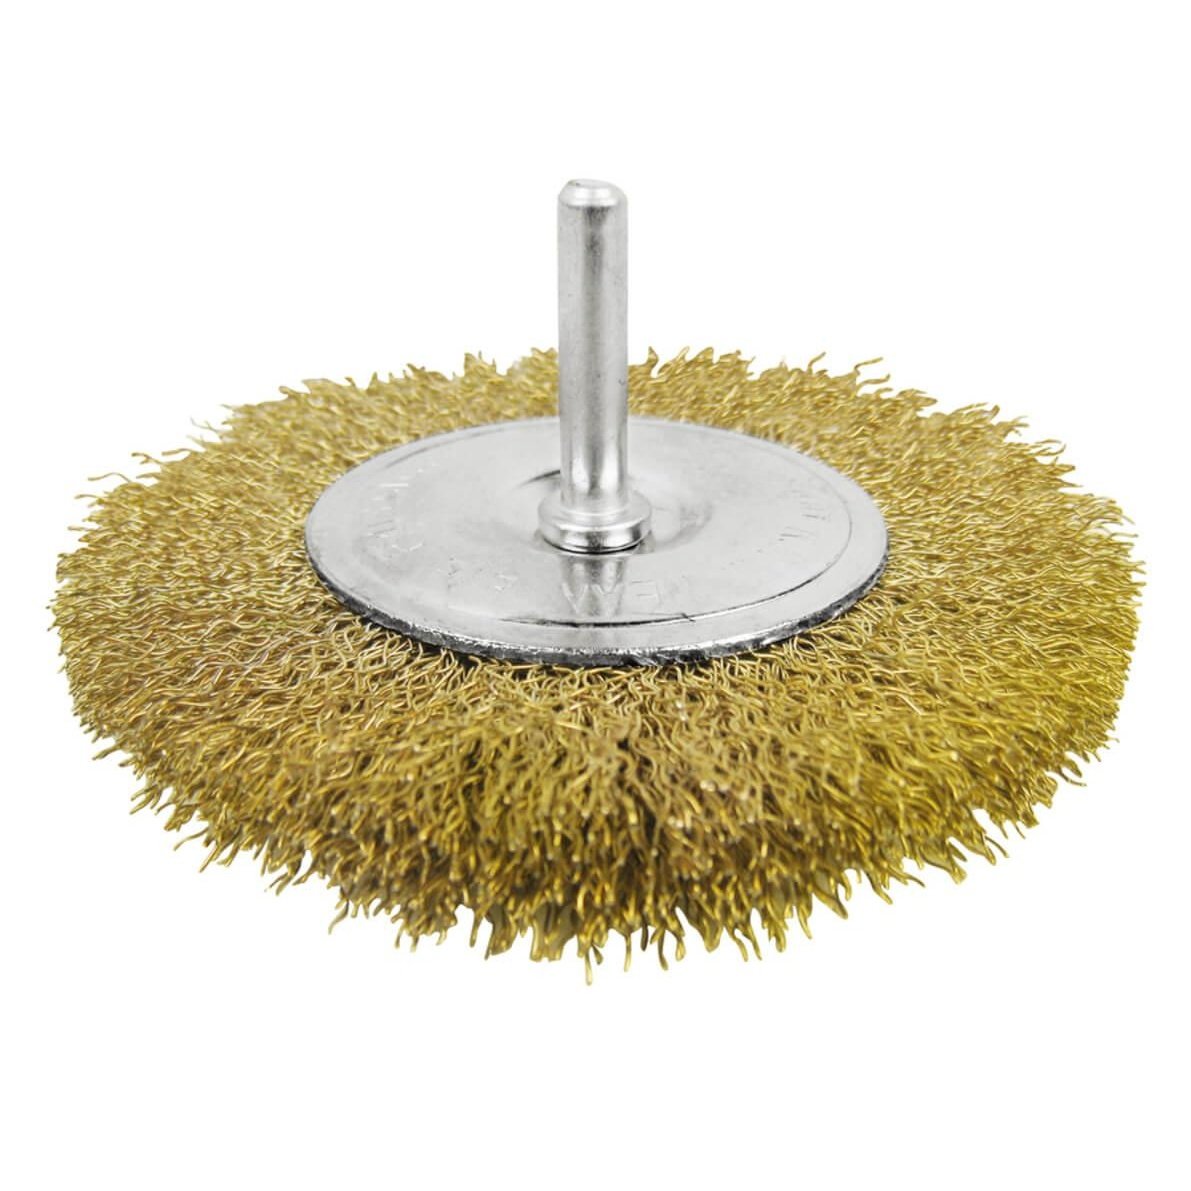 Total Circular Grinding Wire Brush - TAC34021 TAC34031 & TAC34041 | Supply Master | Accra, Ghana Wire Wheels & Brushes Buy Tools hardware Building materials